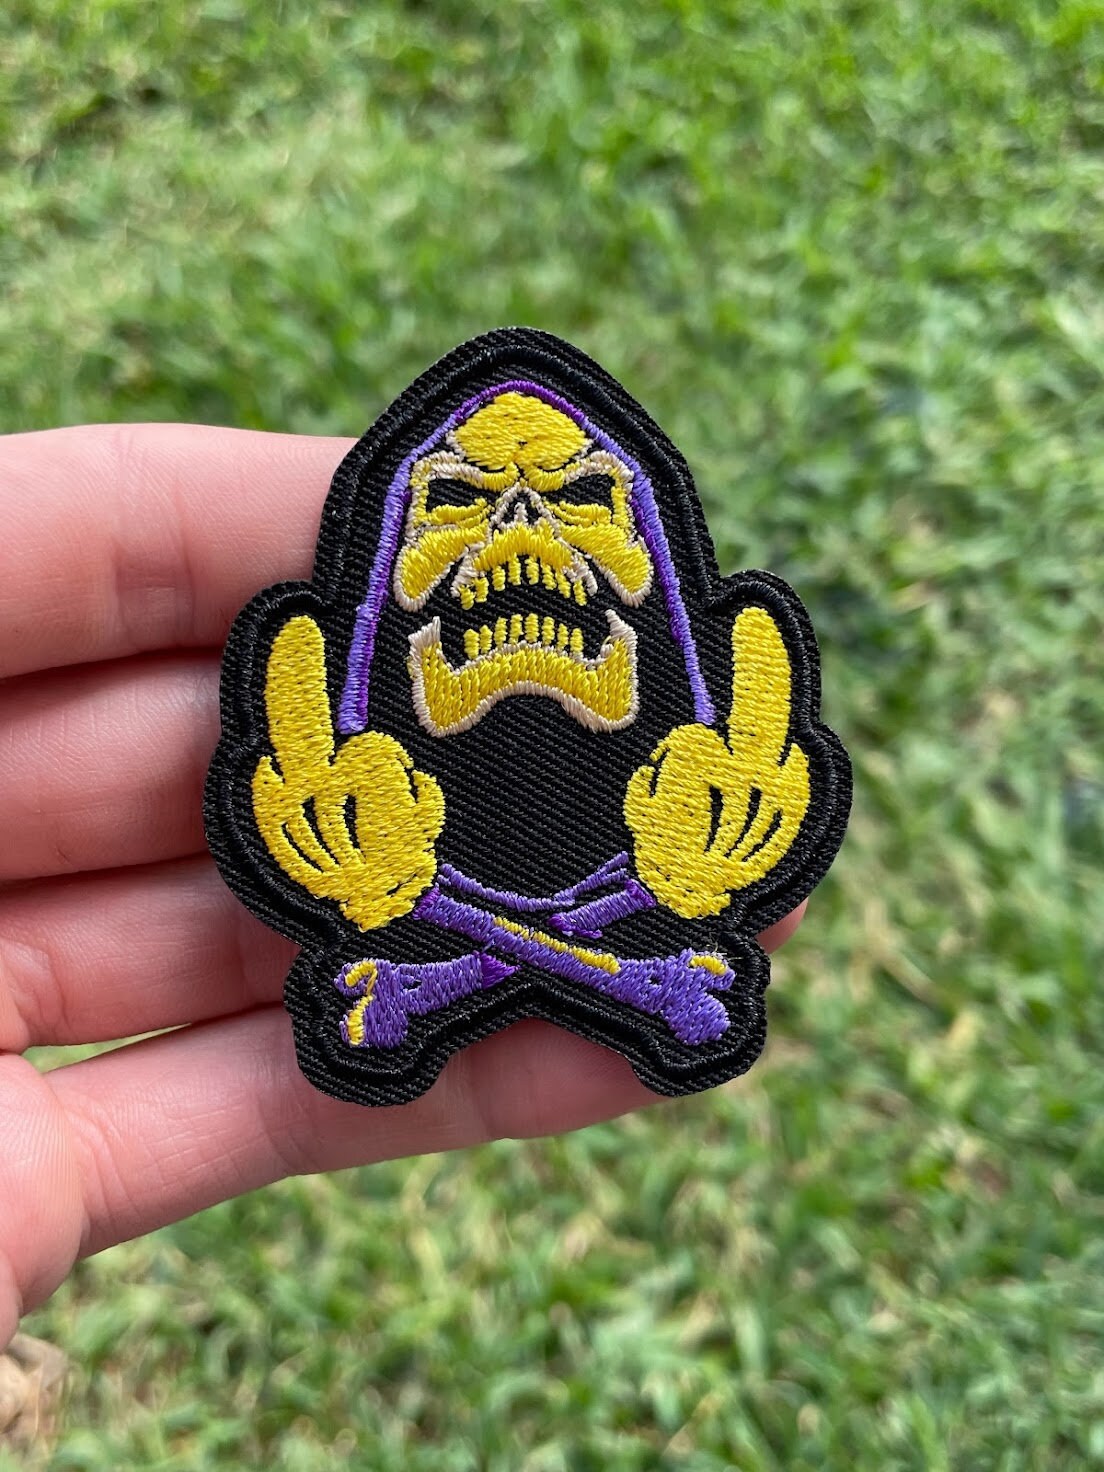 Lurk Laugh Loathe Patches Skeletor Patch Meme Patch Funny Patch Iron on Patch  Embroidered Patch Patches for Vests 